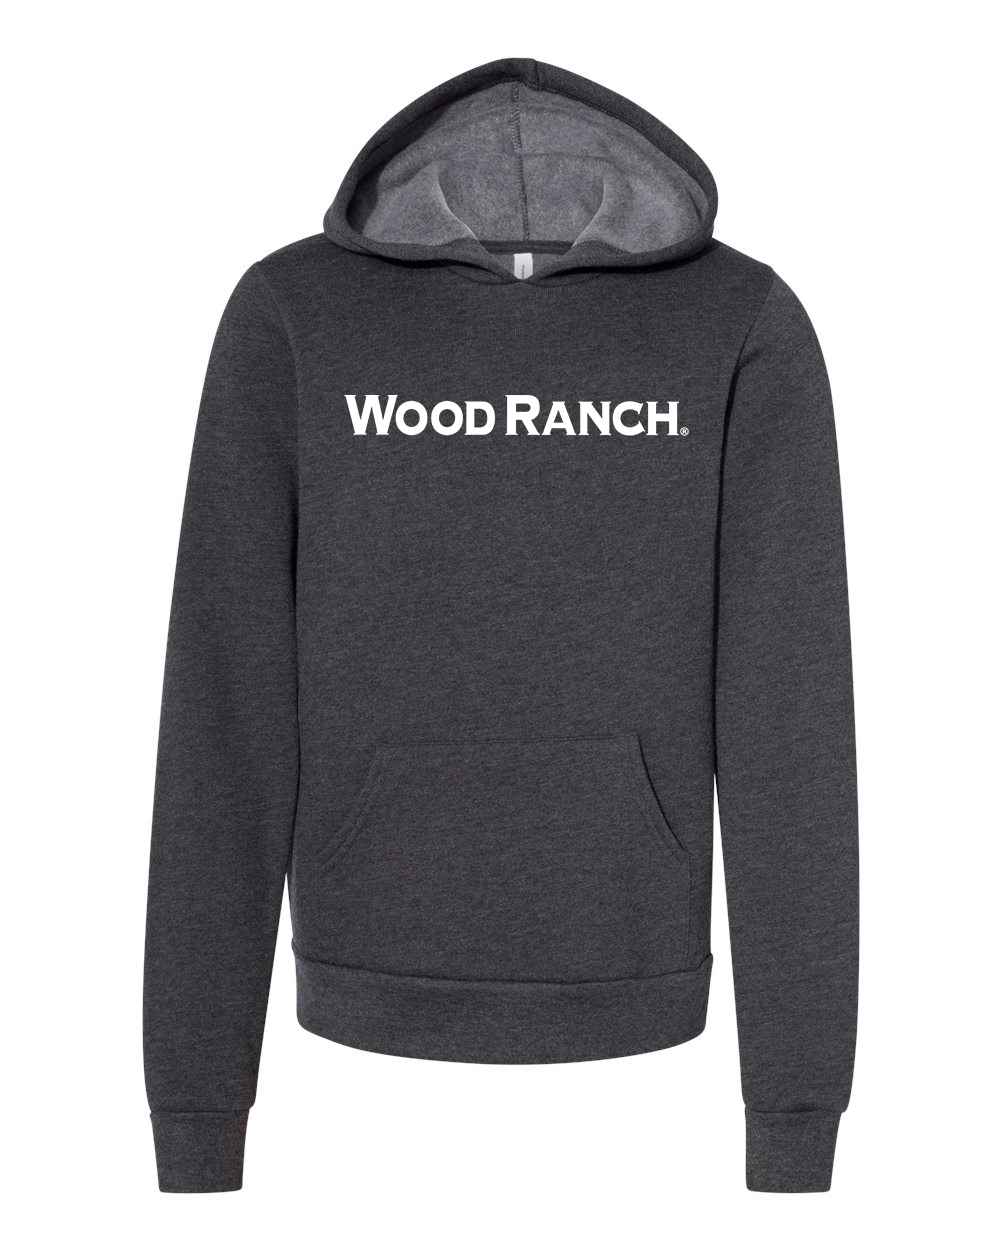 About the product. Frontside of dark grey pullover hoodie style garment. White Wood Ranch logo in the center. This is a youth size.